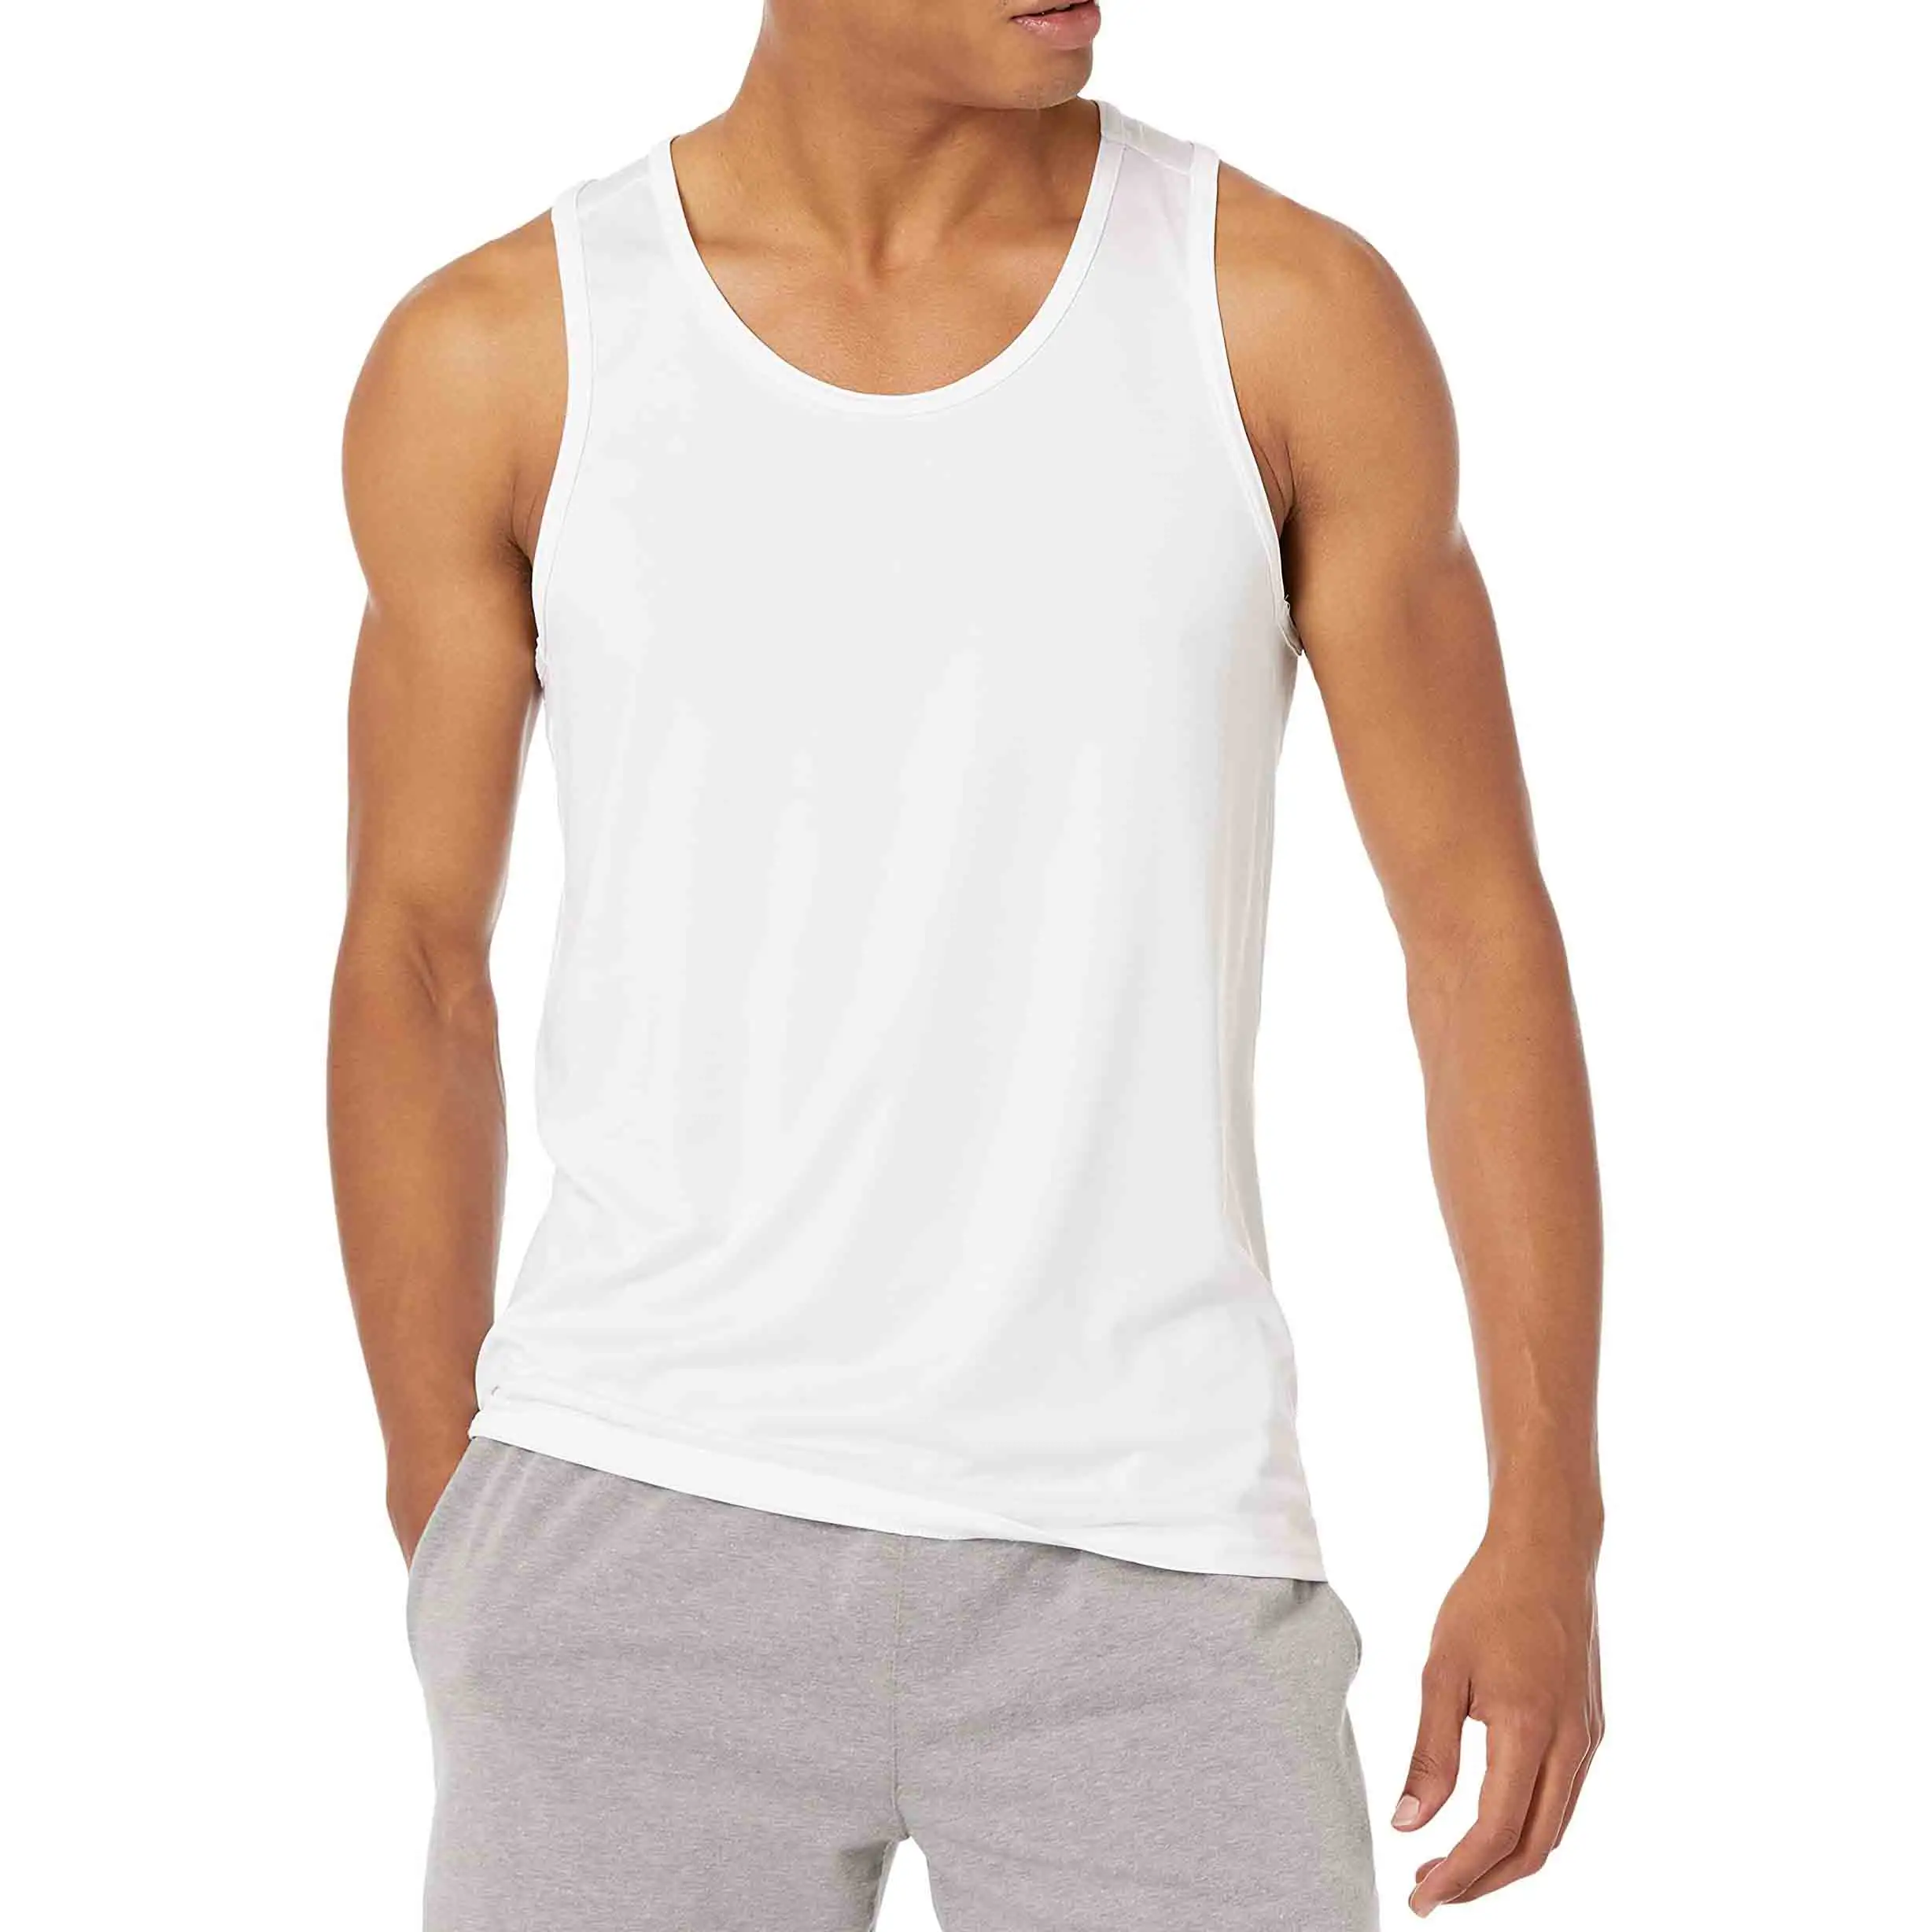 Top New Trending Casual Fitness Crop Tank Tops Sleeveless Vest Gym Clothing Loose Fit Men Tank Top